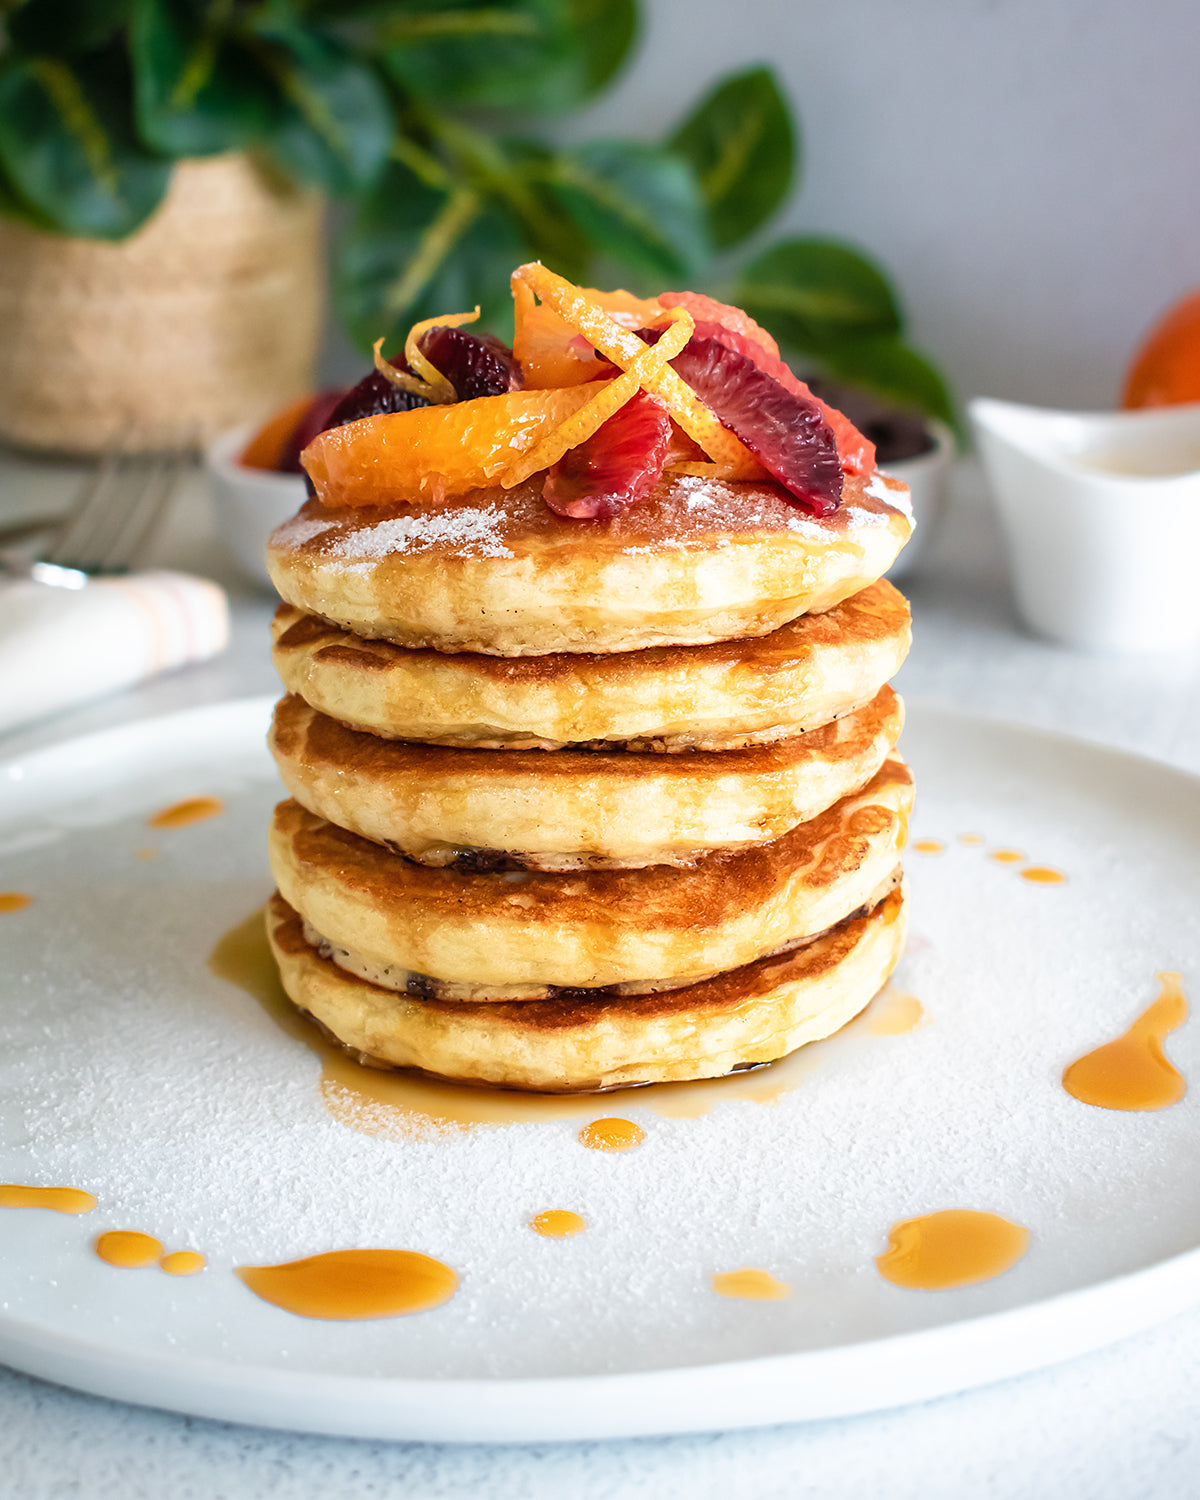 Vegan Buttermilk Pancakes with Chocolate Chips and Orange Compote